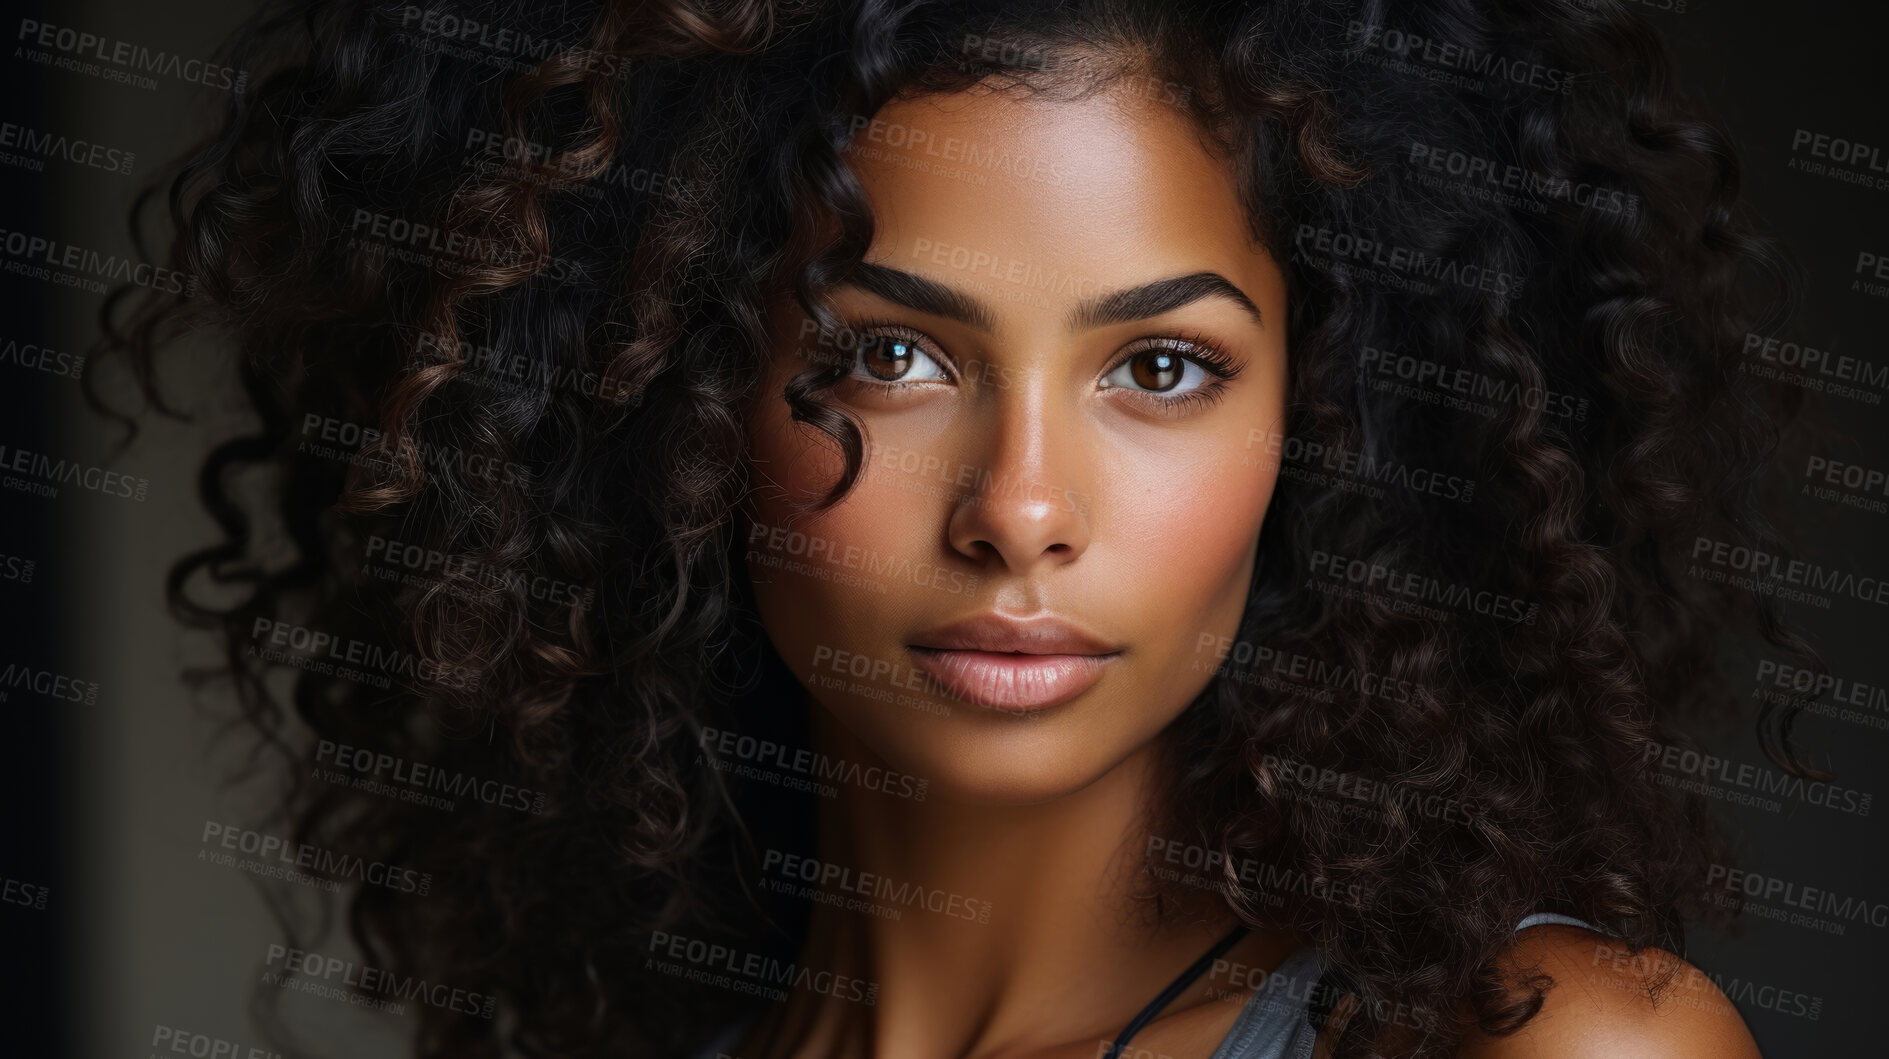 Buy stock photo Portrait of african model. Make-up, smooth skin, curly hair. Fashion, editorial concept.